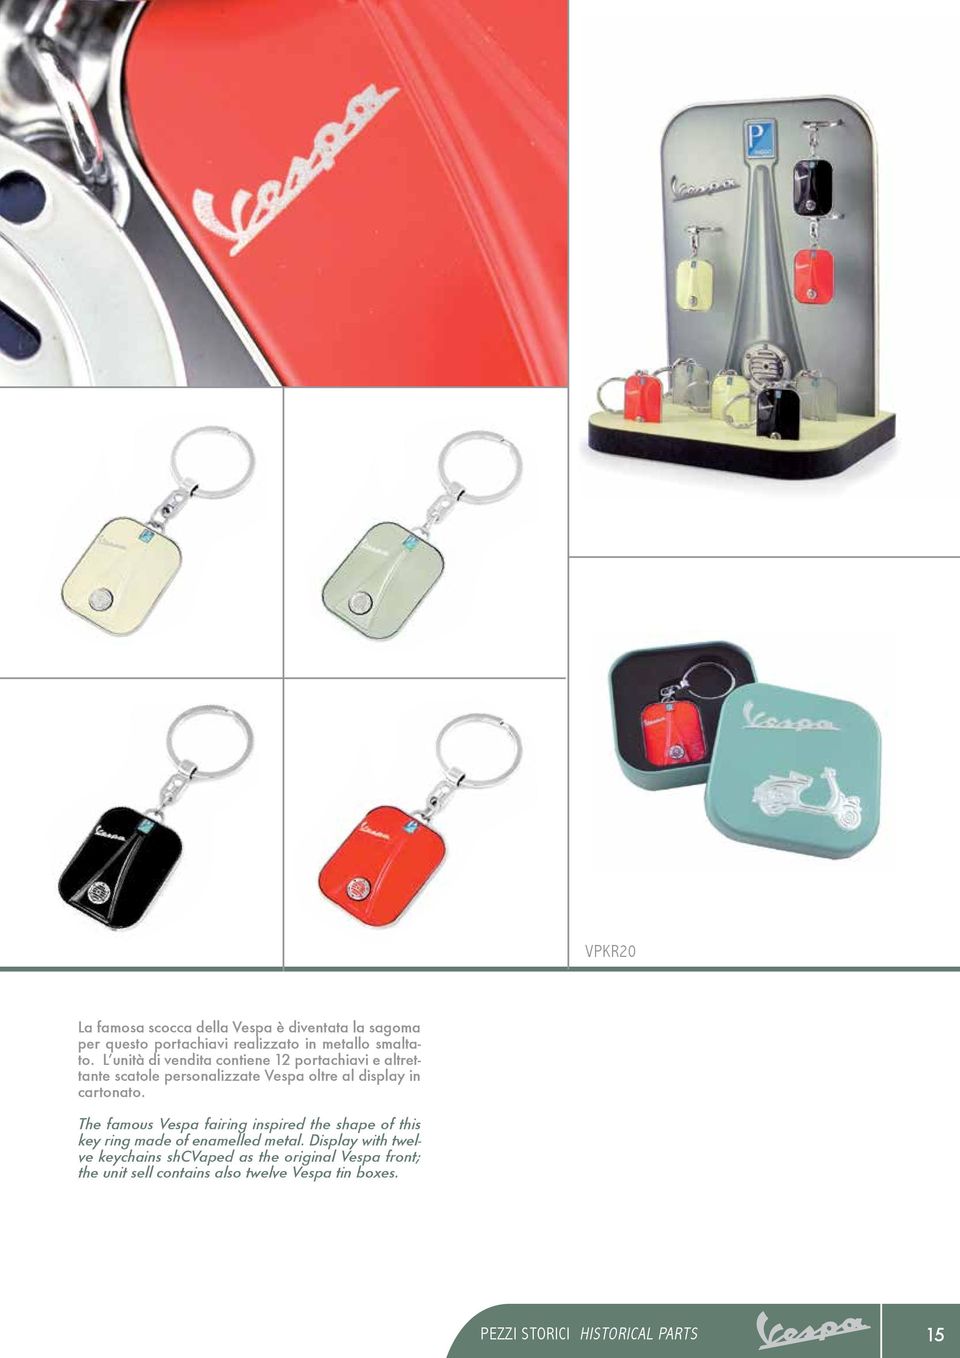 The famous Vespa fairing inspired the shape of this key ring made of enamelled metal.